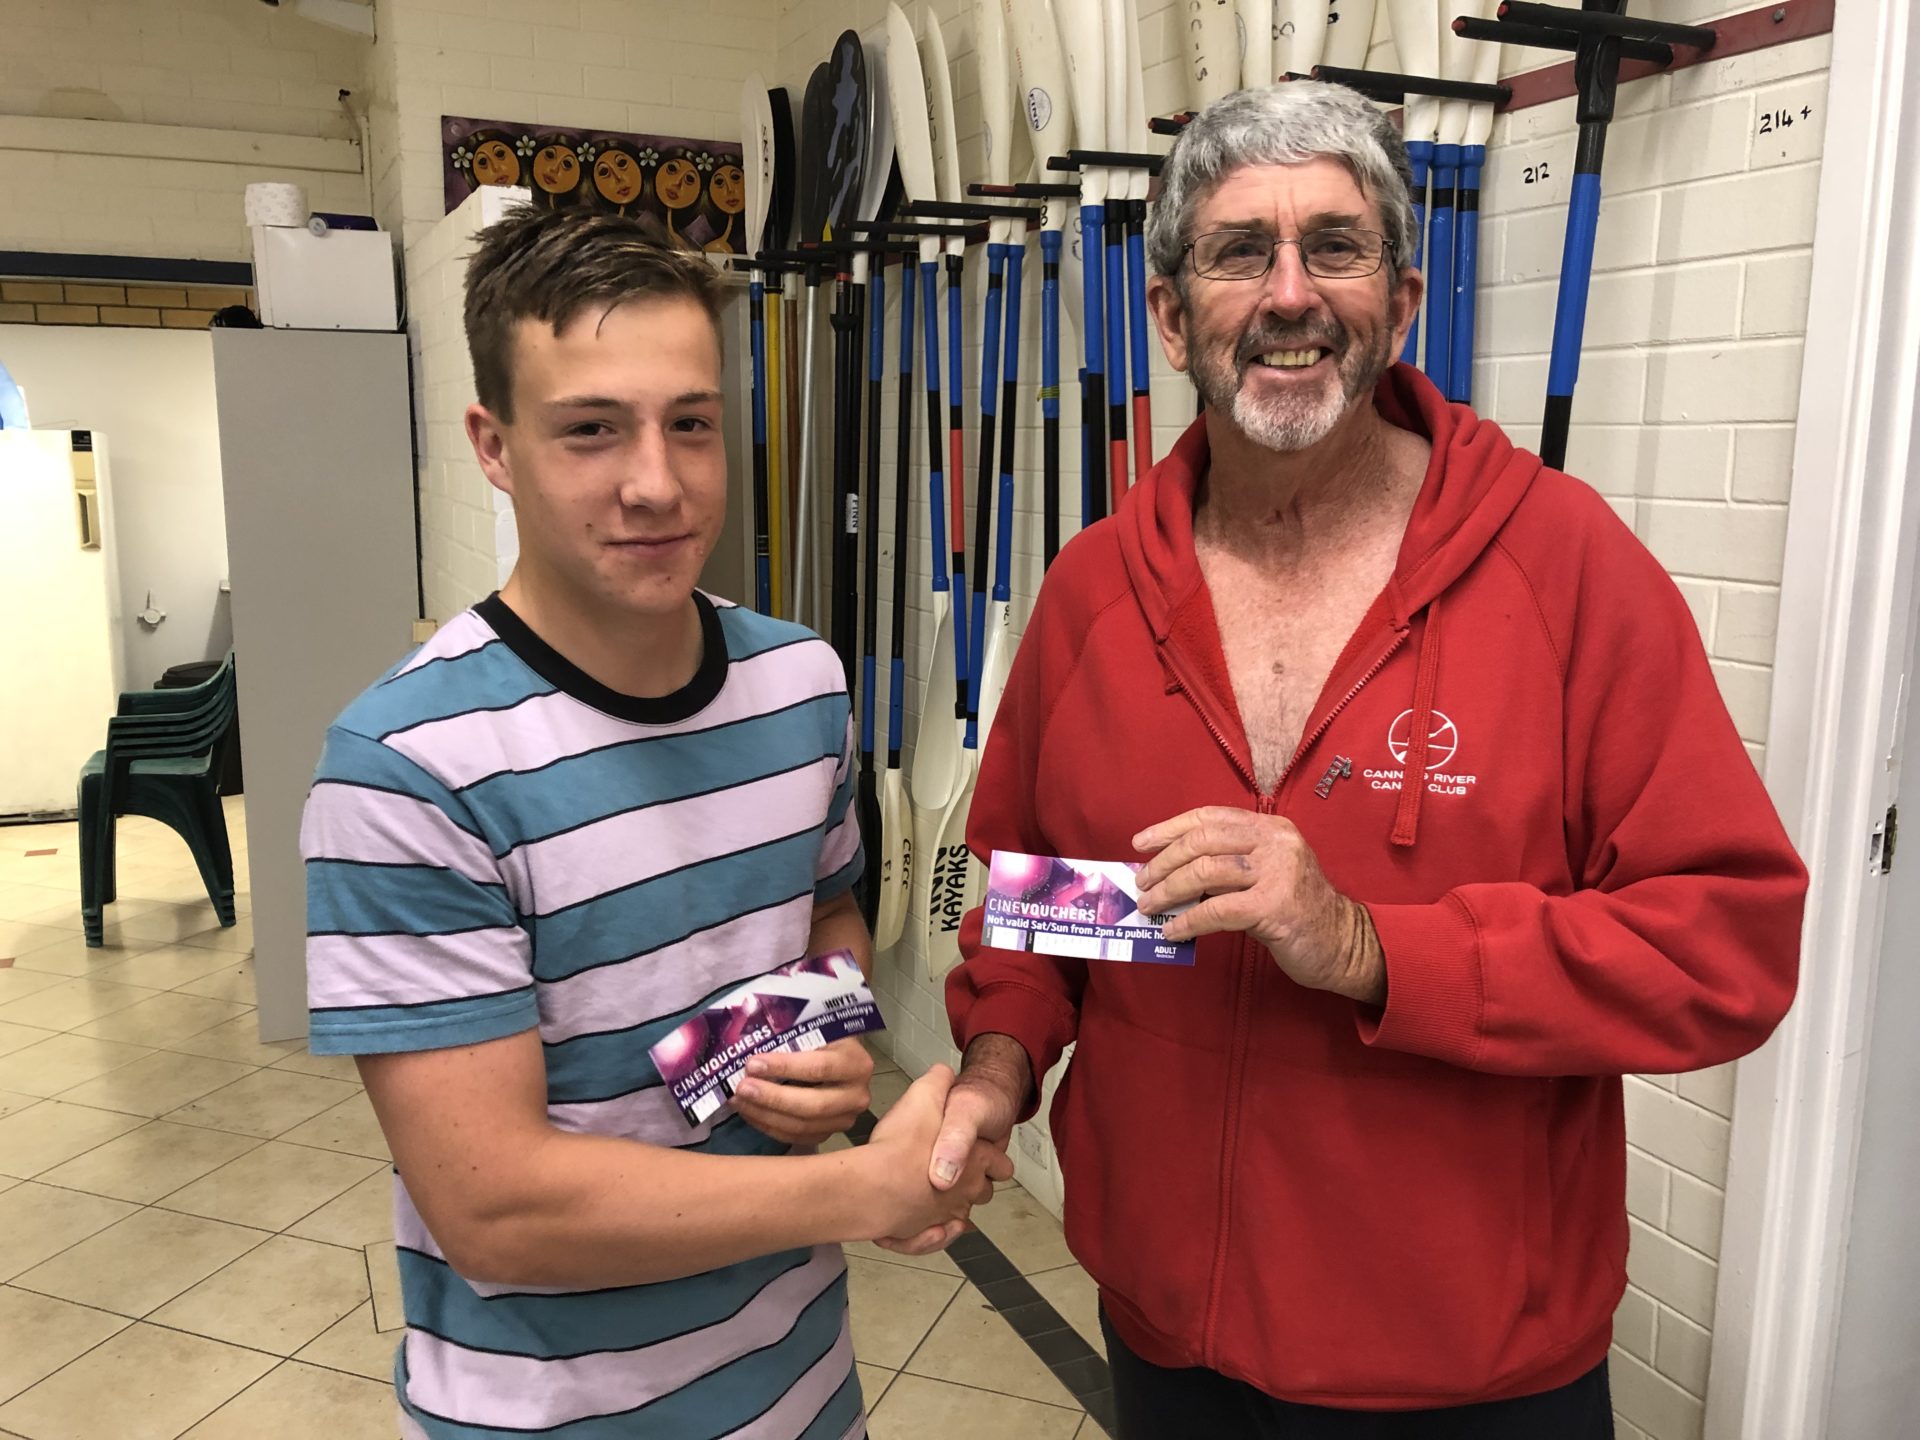 Tuesday 15th October 2019 : Tonight’s photo shows club member David Griffiths and Noah Boldy accepting the winners movie vouchers. 